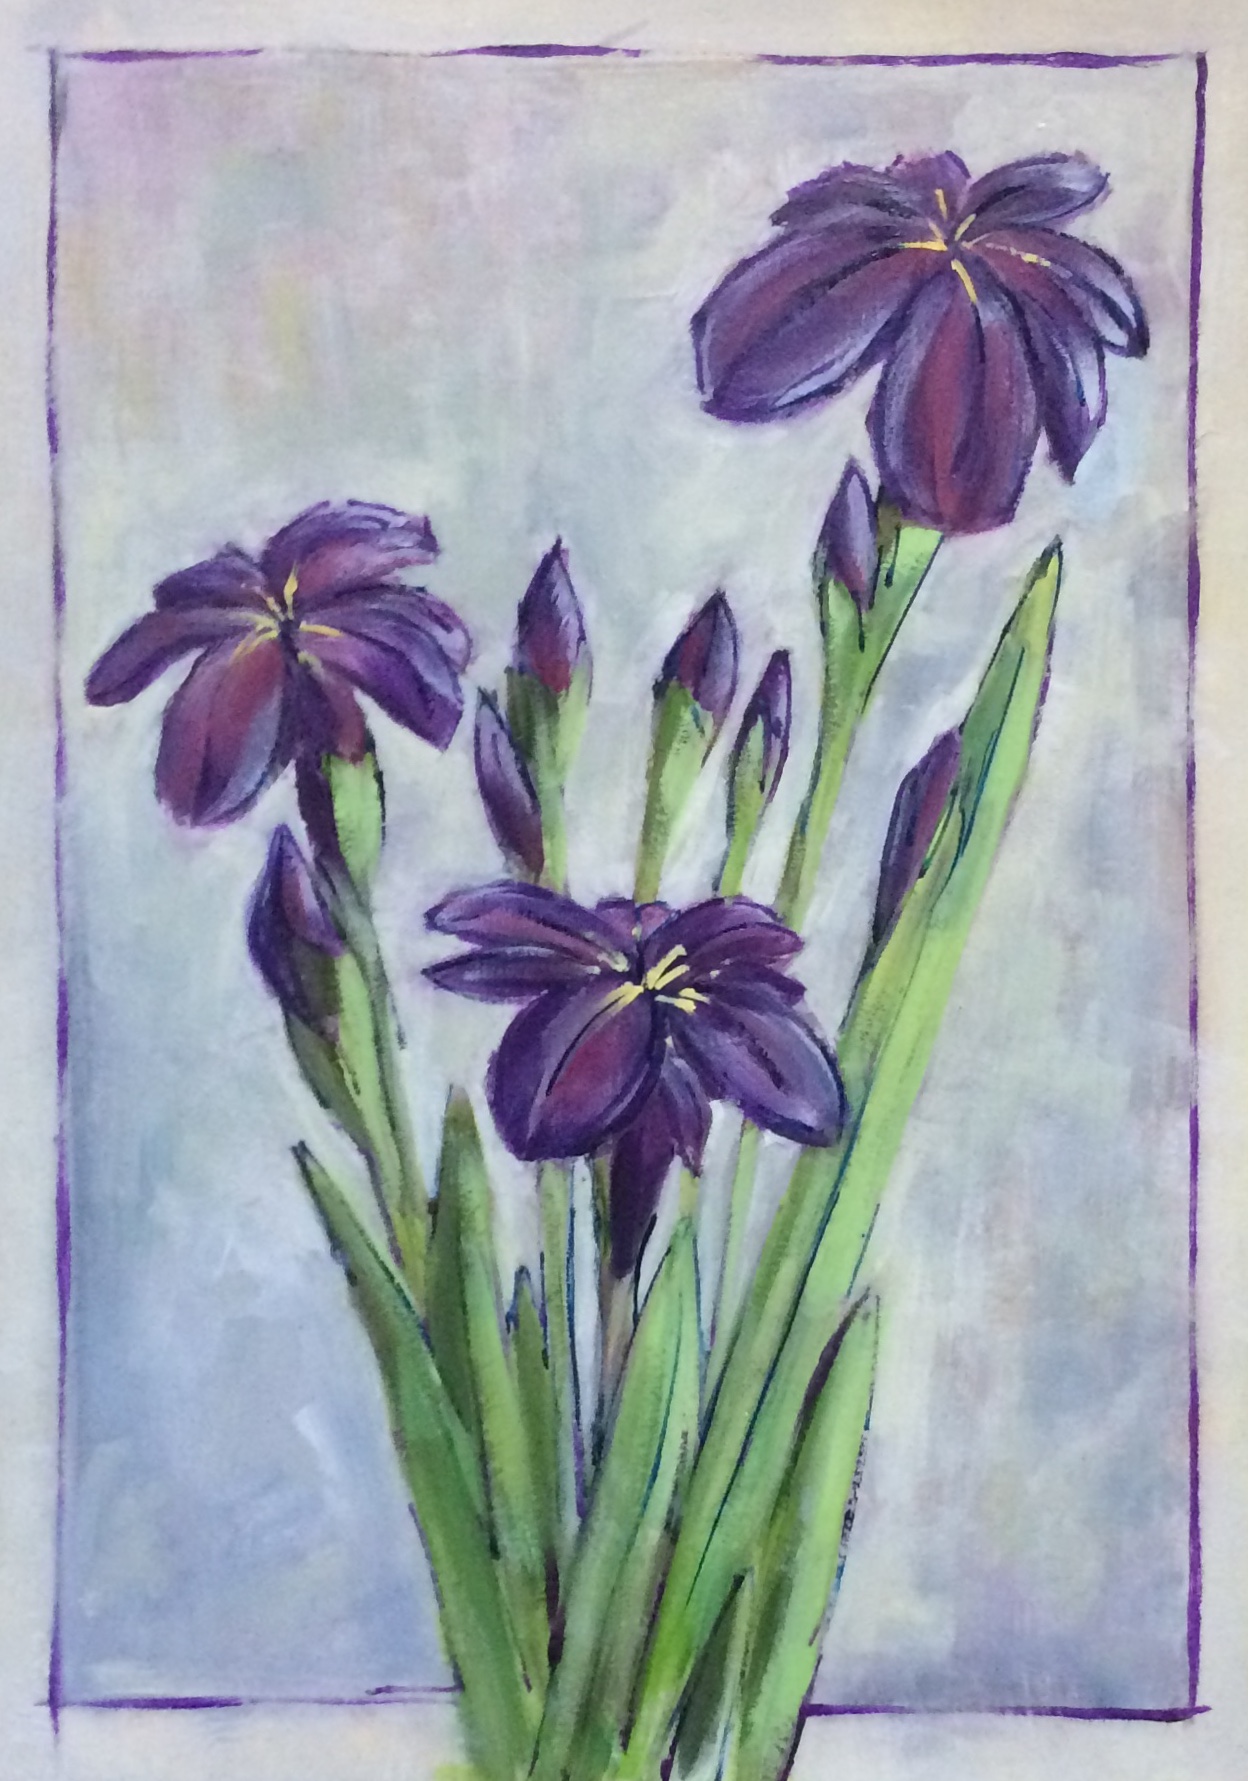 Japanese Iris I. Oil on primed Arches, 16 by 20 inches, 2014